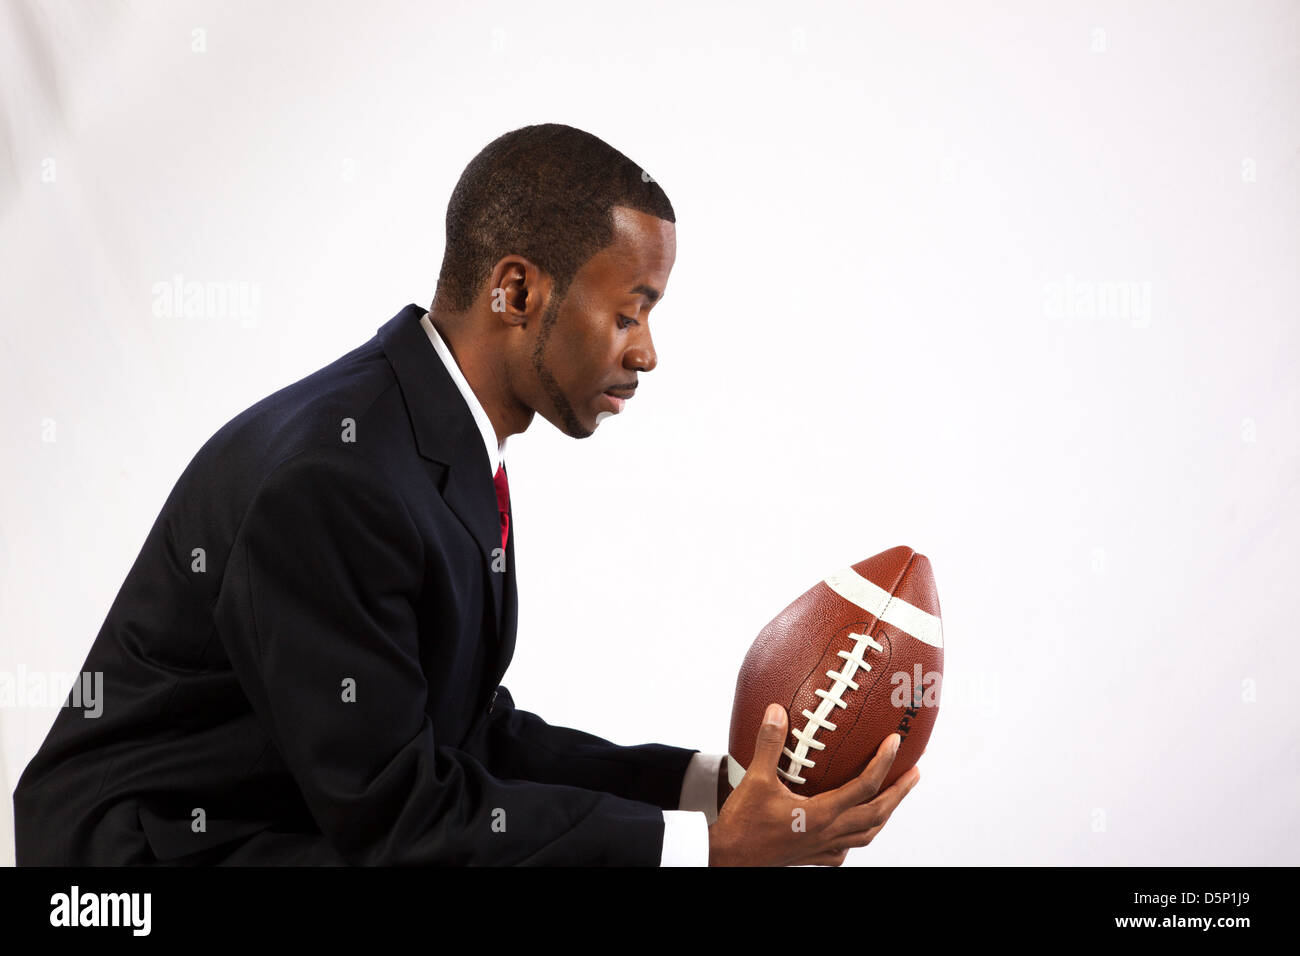 Handsome black man wearing a dark suit, white shirt and red tie, holding an American football and remembering his youth Stock Photo